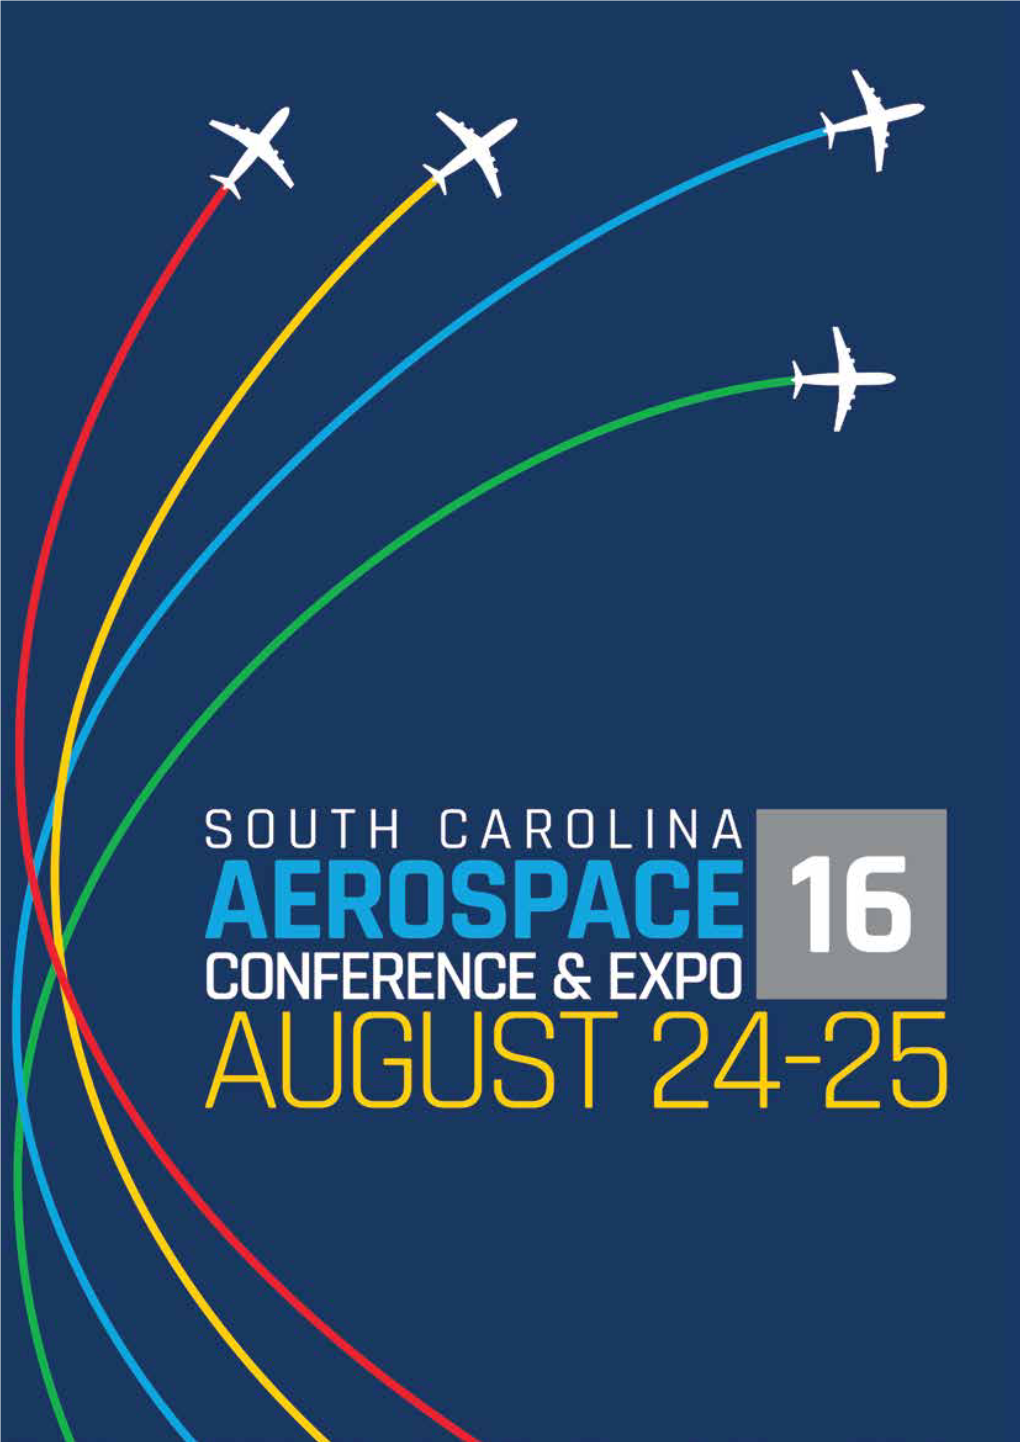 Joan Robinson-Berry 15 Conference Sessions Boeing South Carolina, Boeing Commercial Airplanes * ADCP Technical Workshop Will Run Until 5PM